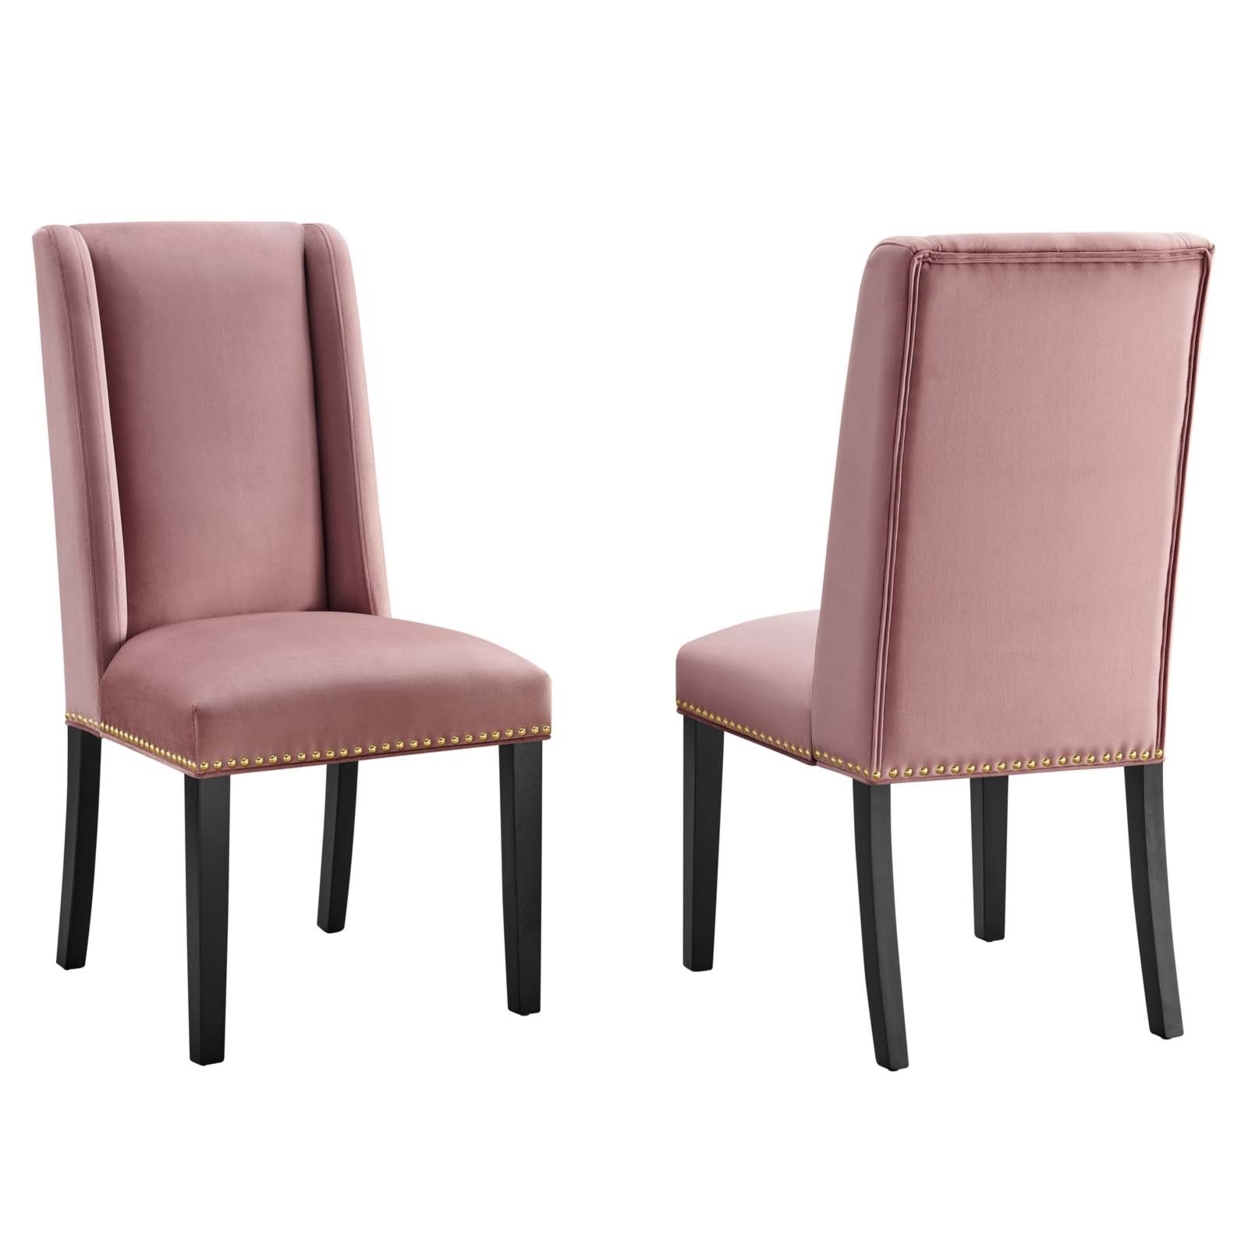 Baron Performance Velvet Dining Chairs - Set of 2, Dusty Rose